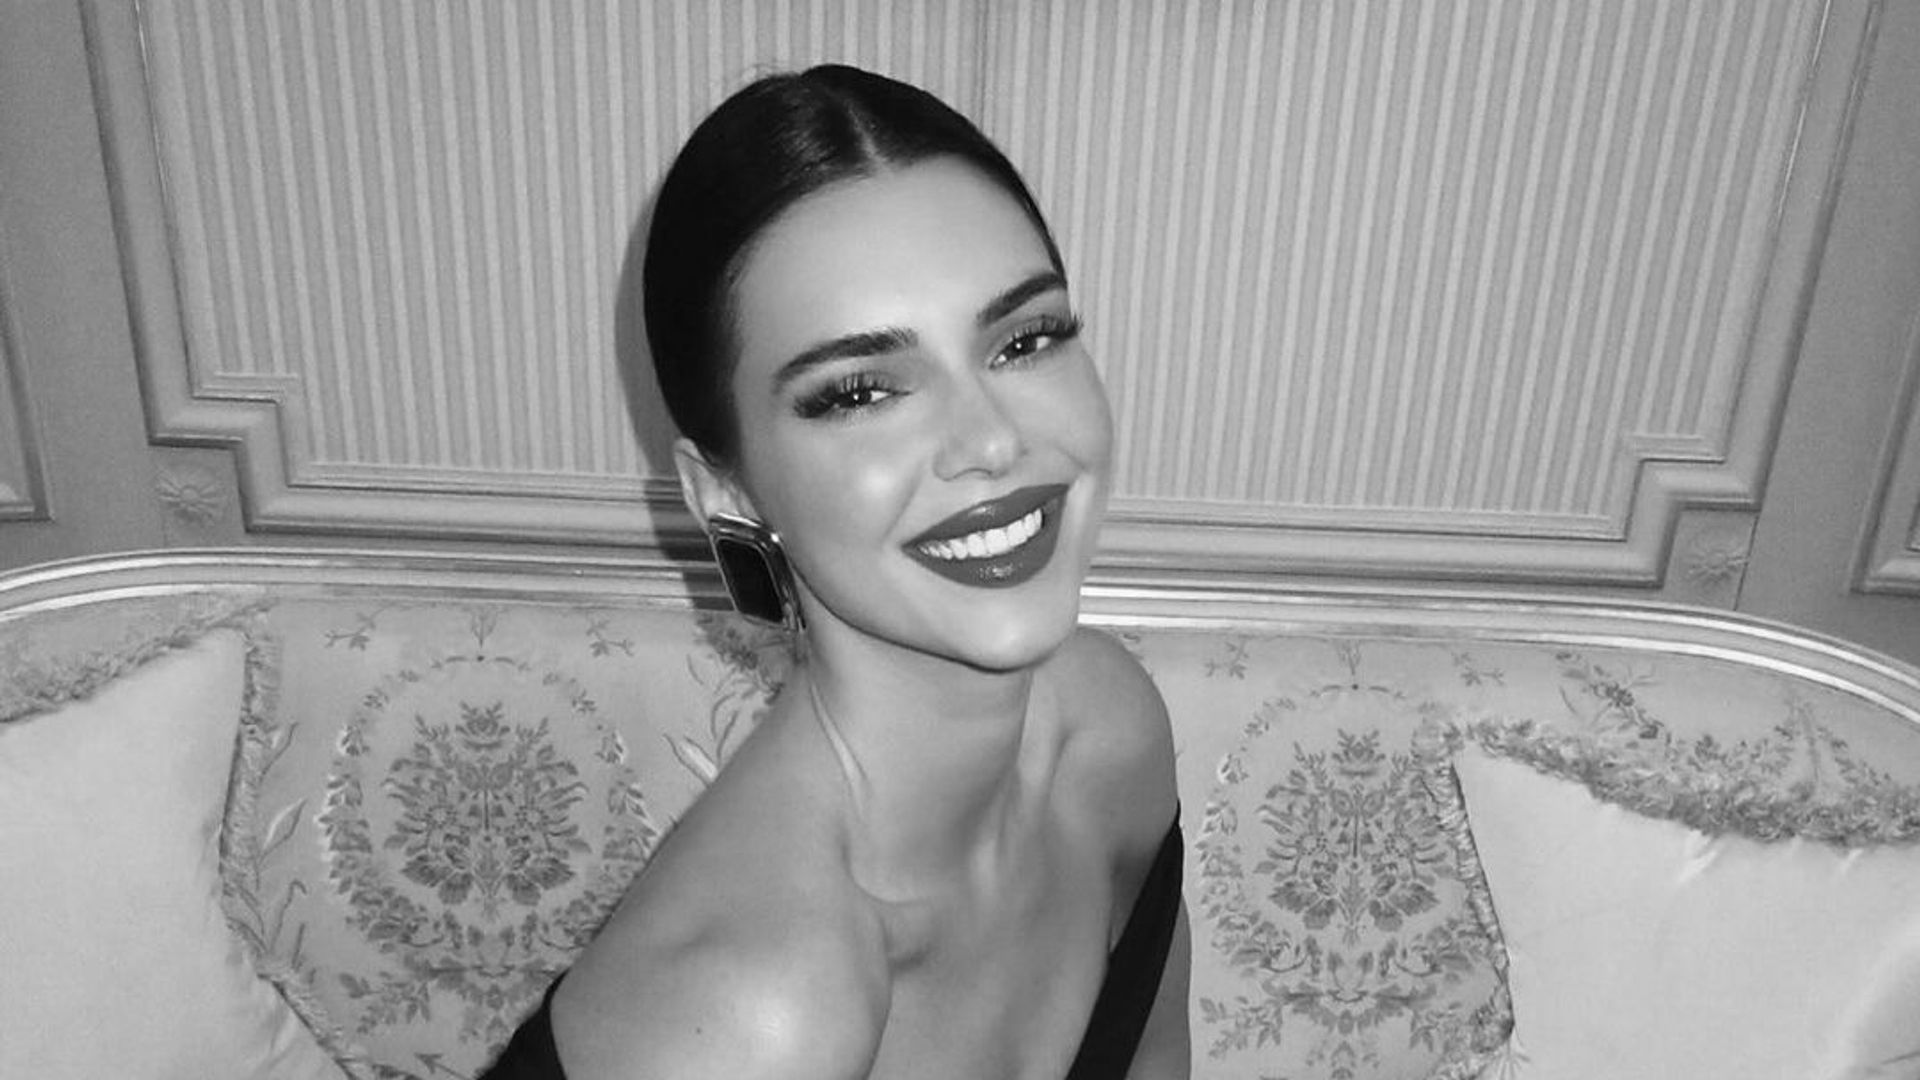 Kendall Jenner Latest News: Hair, Style, Makeup & Outfits Pictures